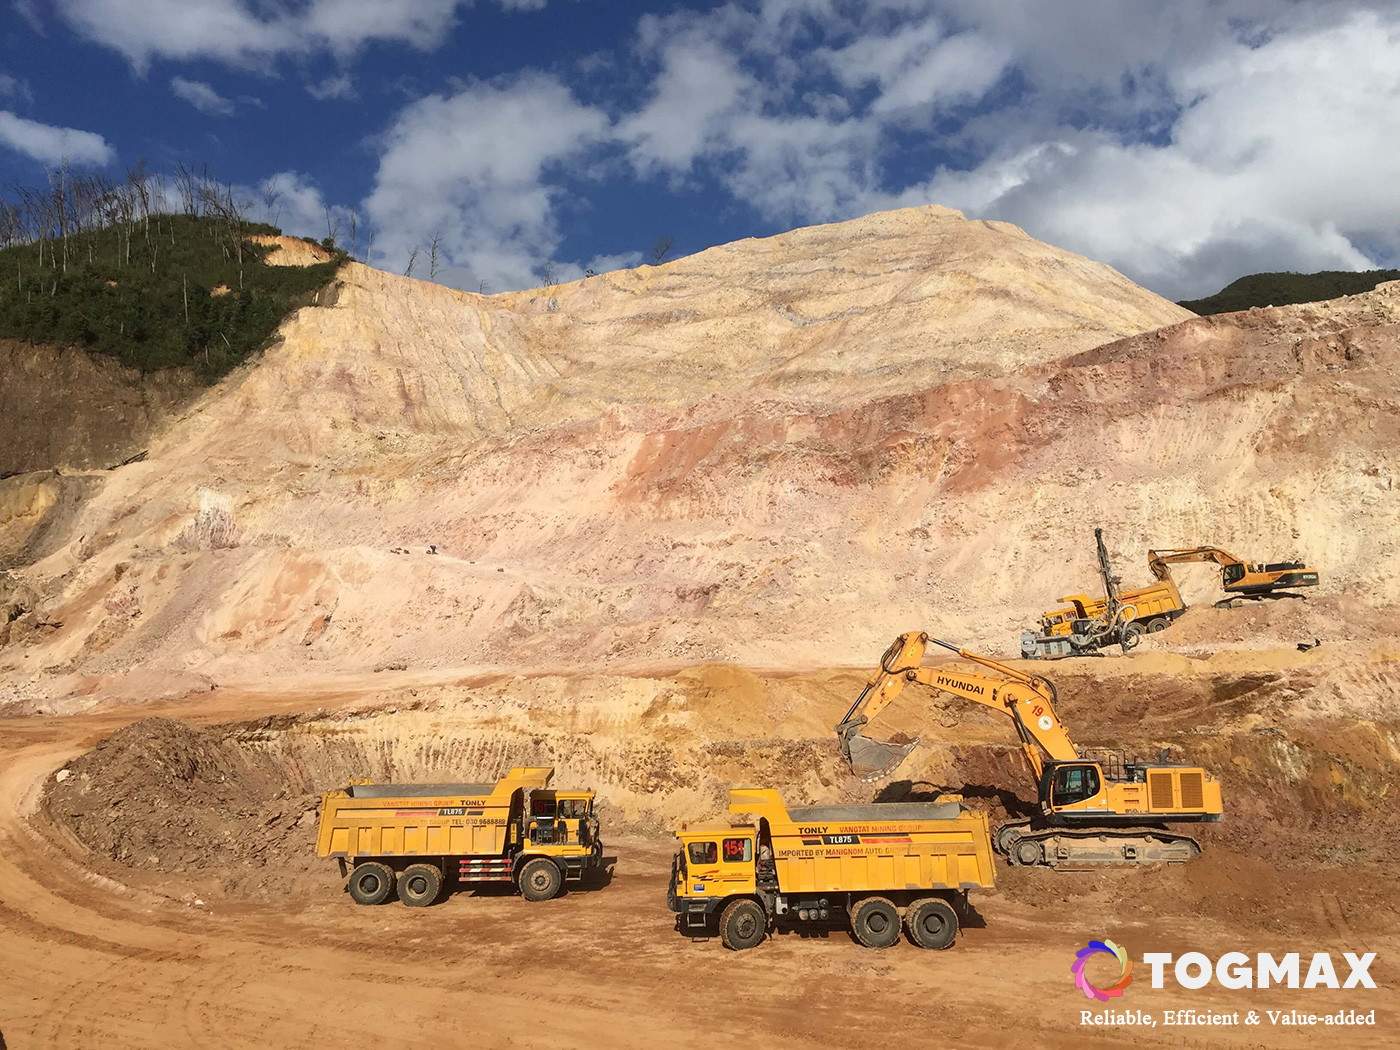 Tonly_TL875_6X4_Off_Highway_Mining_Wide_Body_Heavy_Duty_Dump_Trucks_in_African_Mine_Application-TogMax_Group